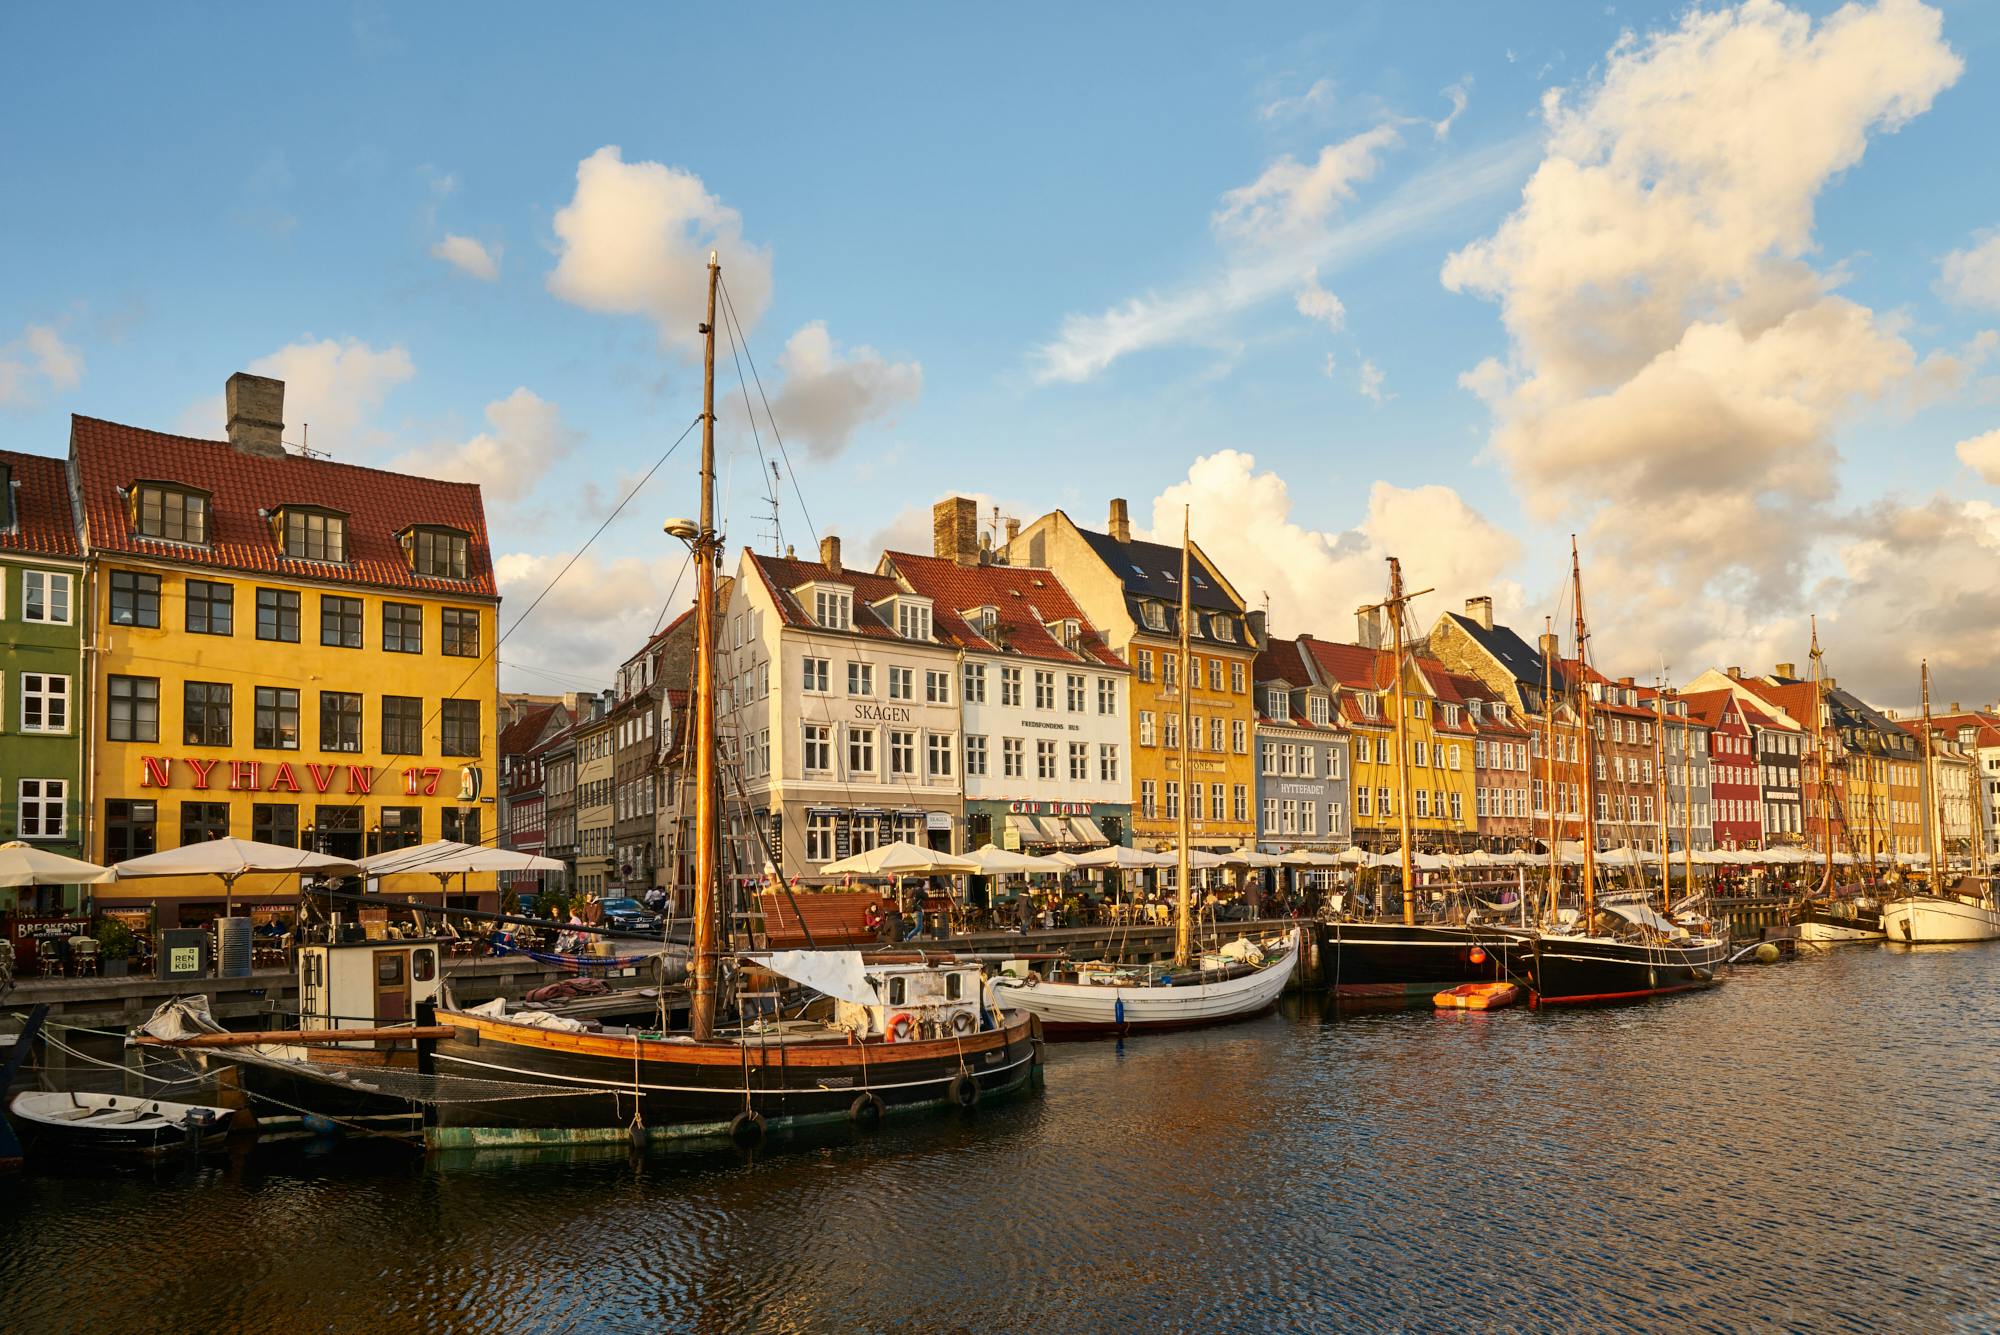 Discover the famous landmarks of Copenhagen in a private photography tour